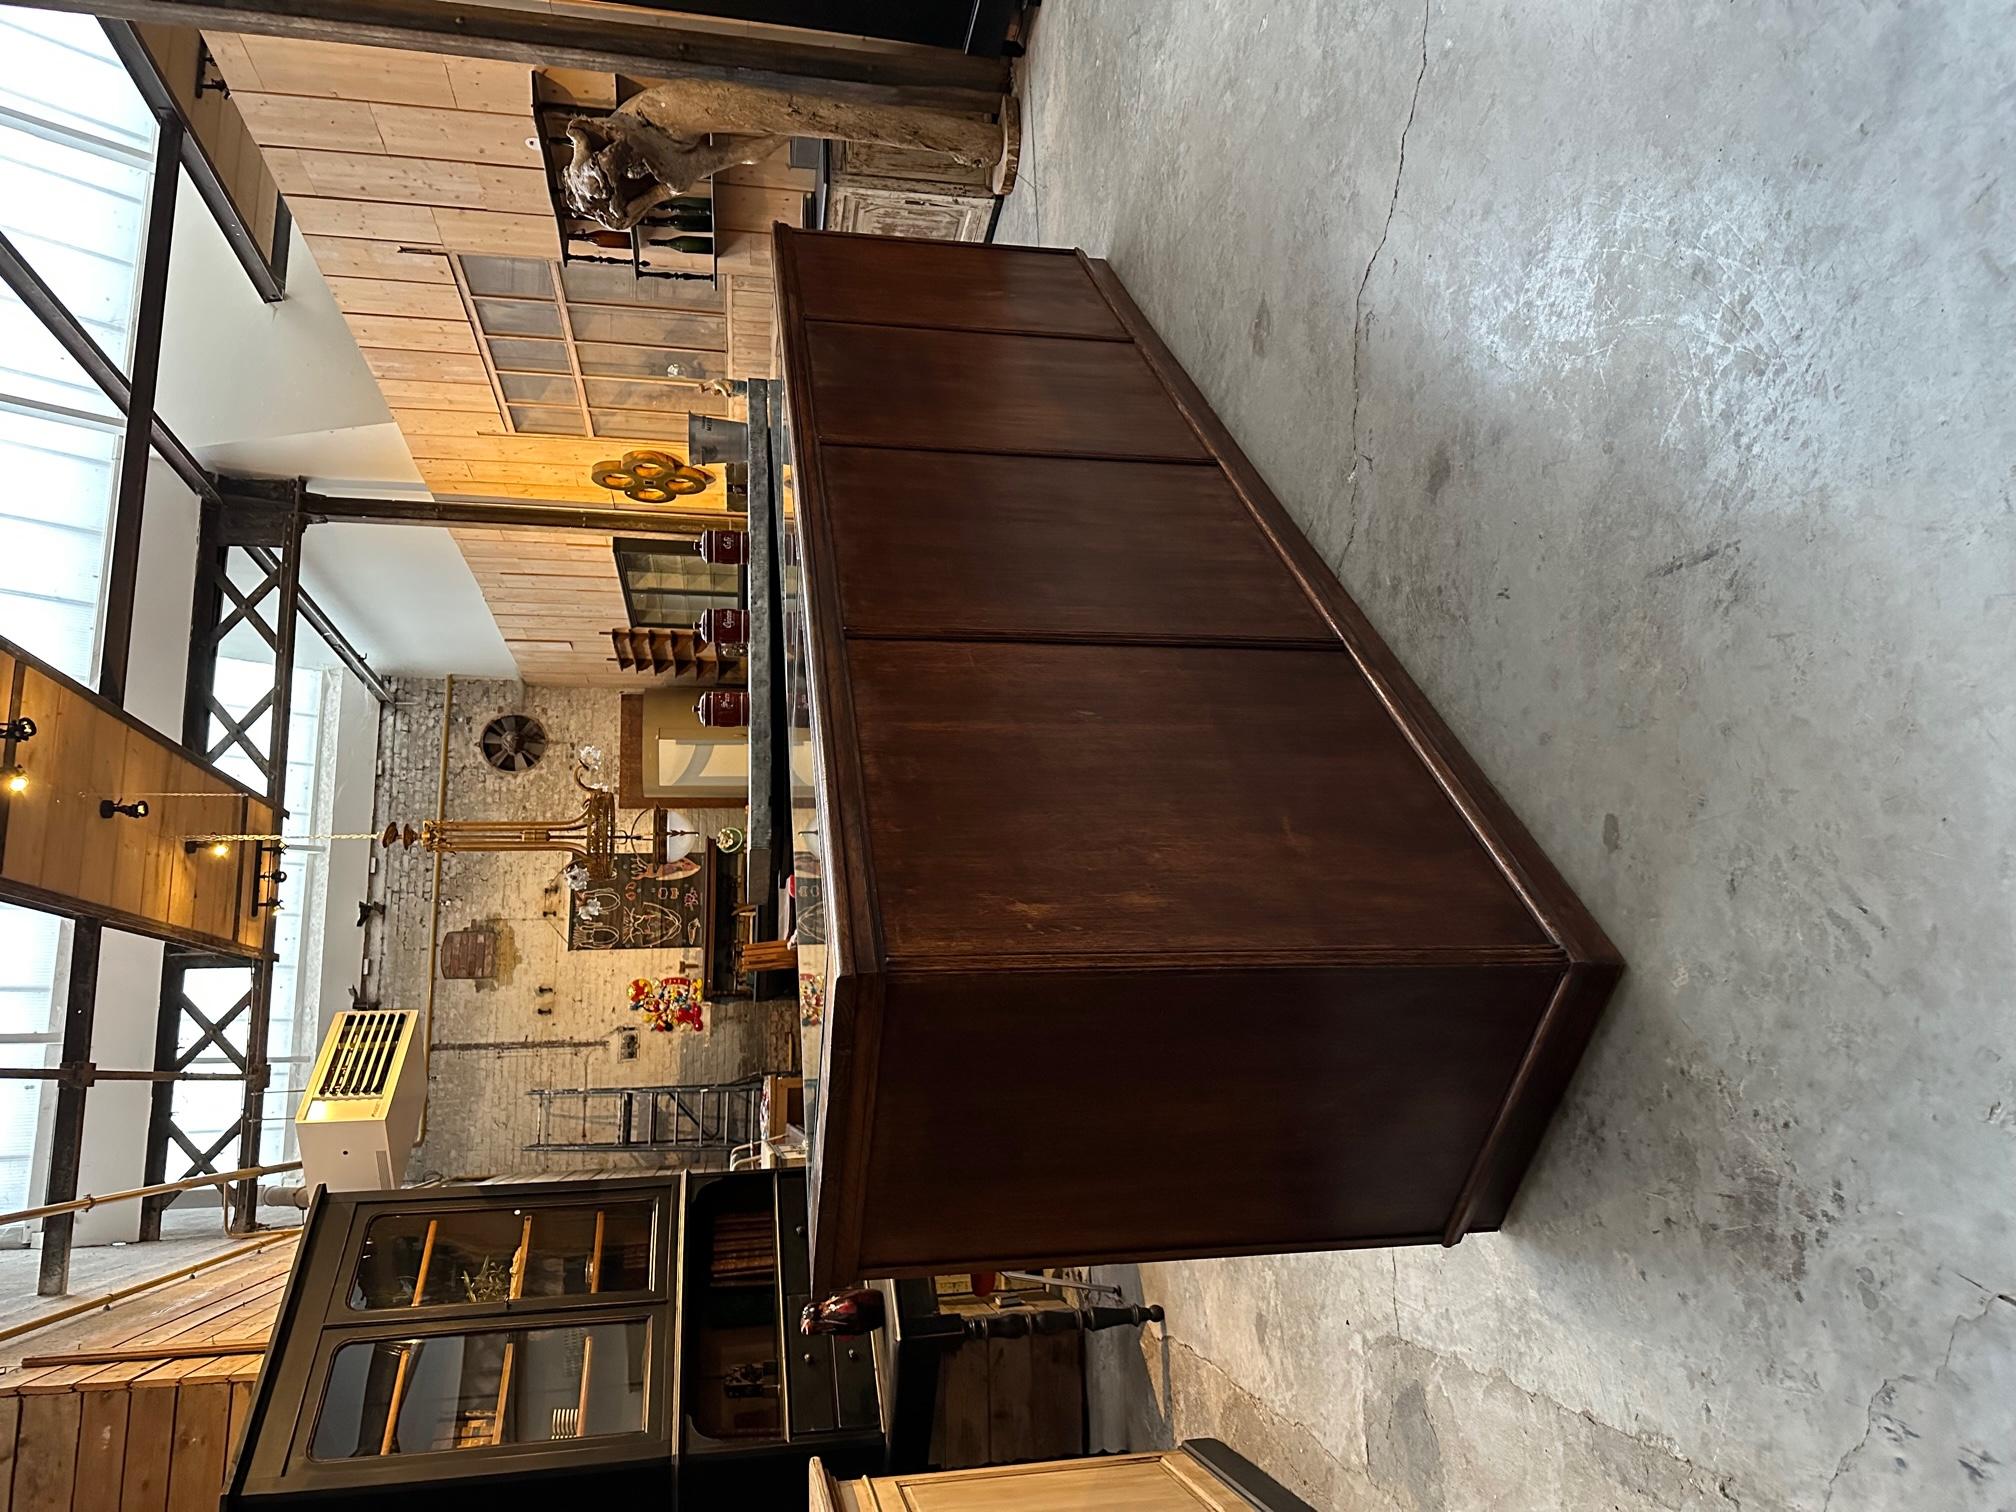 This counter from the 60s has been restored

It has 3 large windows on the top opening from the back

On the rear part of the large storage are present